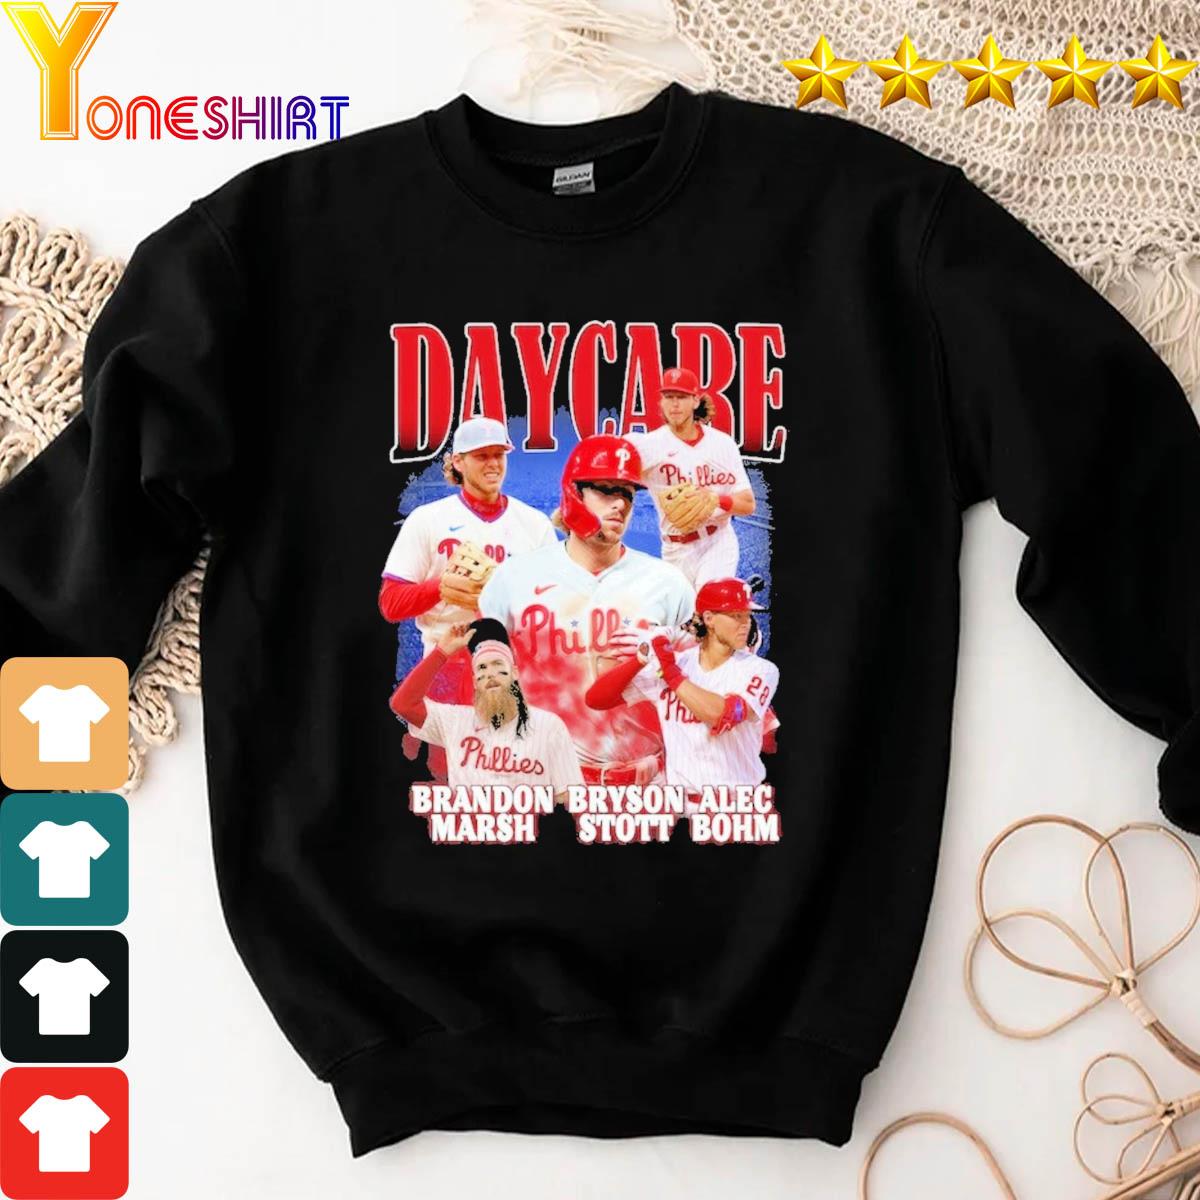 Daycare Philadelphia Baseball Shirt, Bryson Stott Alec Bohm Brandon Marsh  Vintage 90s Phillies Bootleg Tee - Bring Your Ideas, Thoughts And  Imaginations Into Reality Today